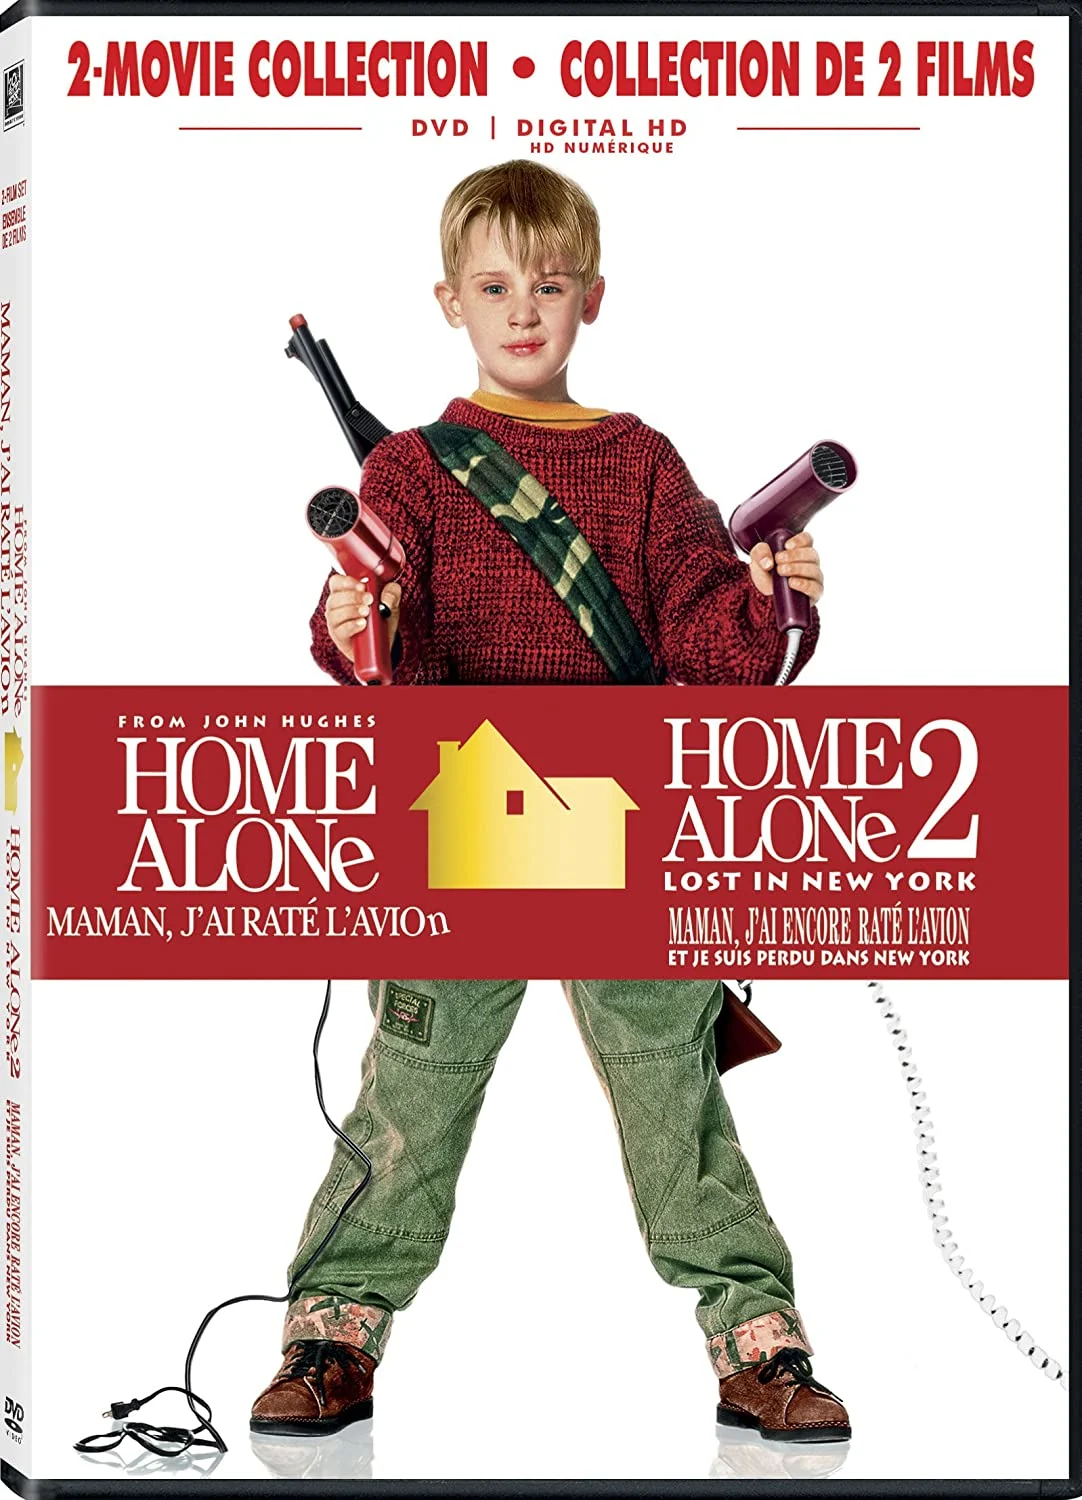 Home Alone & Home Alone 2: Lost In New York (DVD) on MovieShack